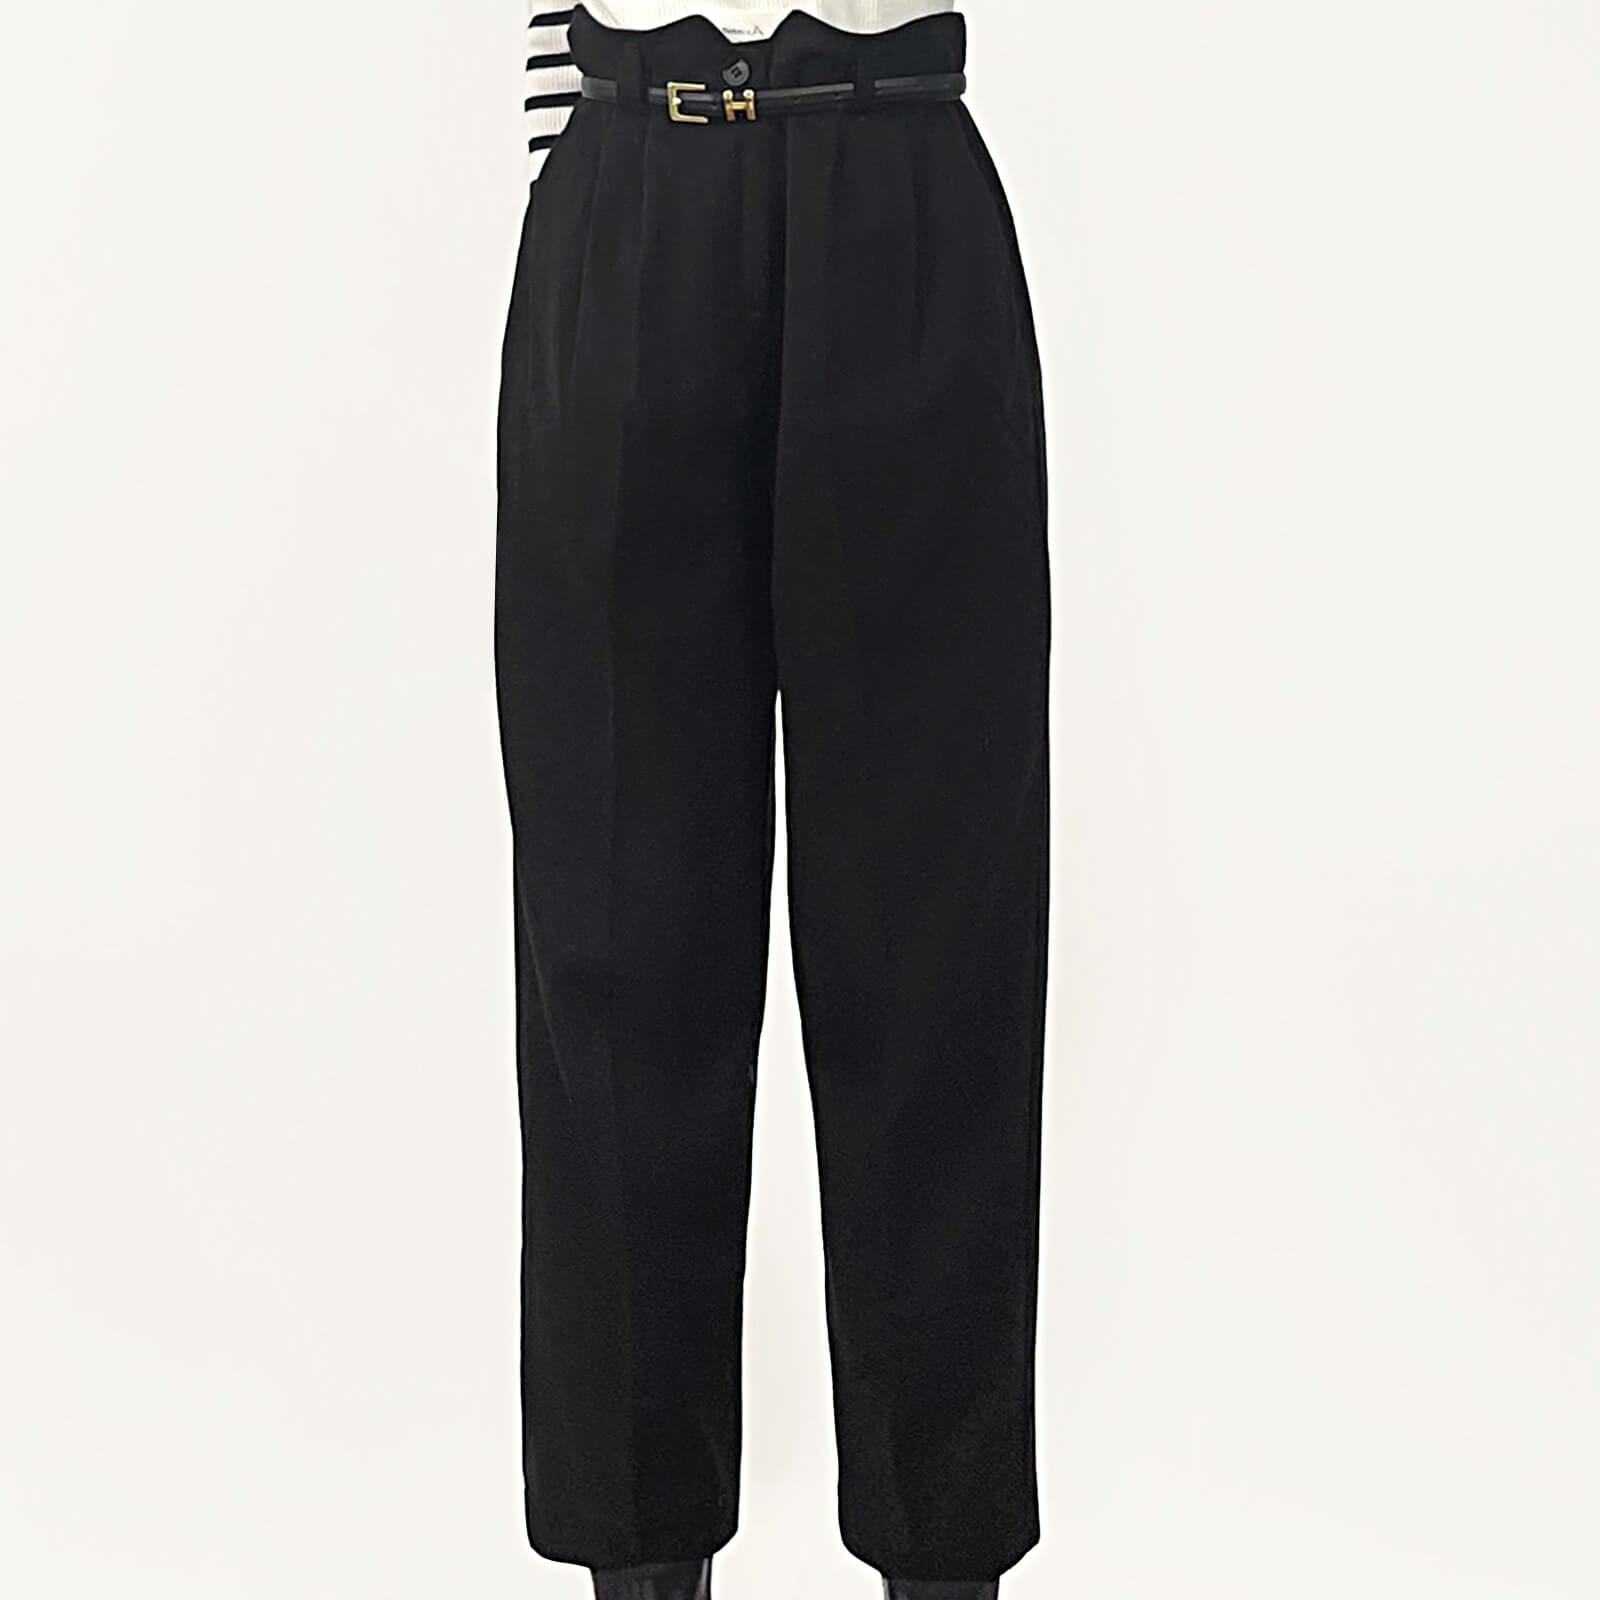 Black Belted Tapered Work Pants